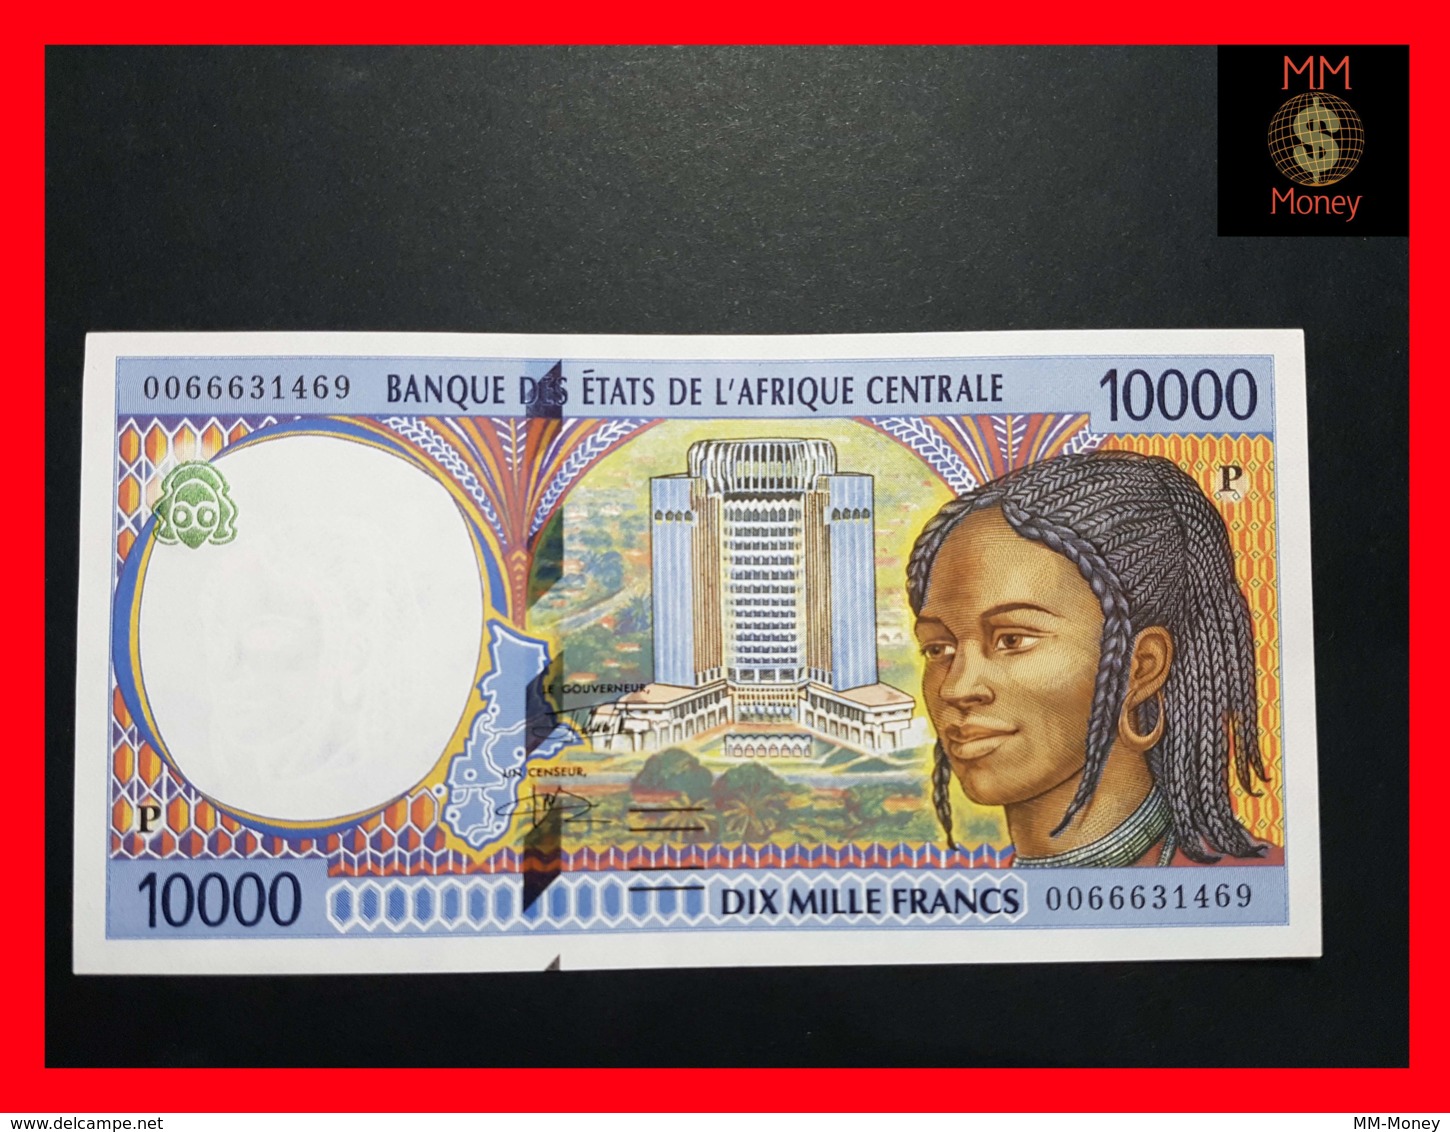 CENTRAL AFRICAN STATES  "P"  CHAD 10.000 10000 Francs 2000  P. 605 P F  AUNC - Centraal-Afrikaanse Staten